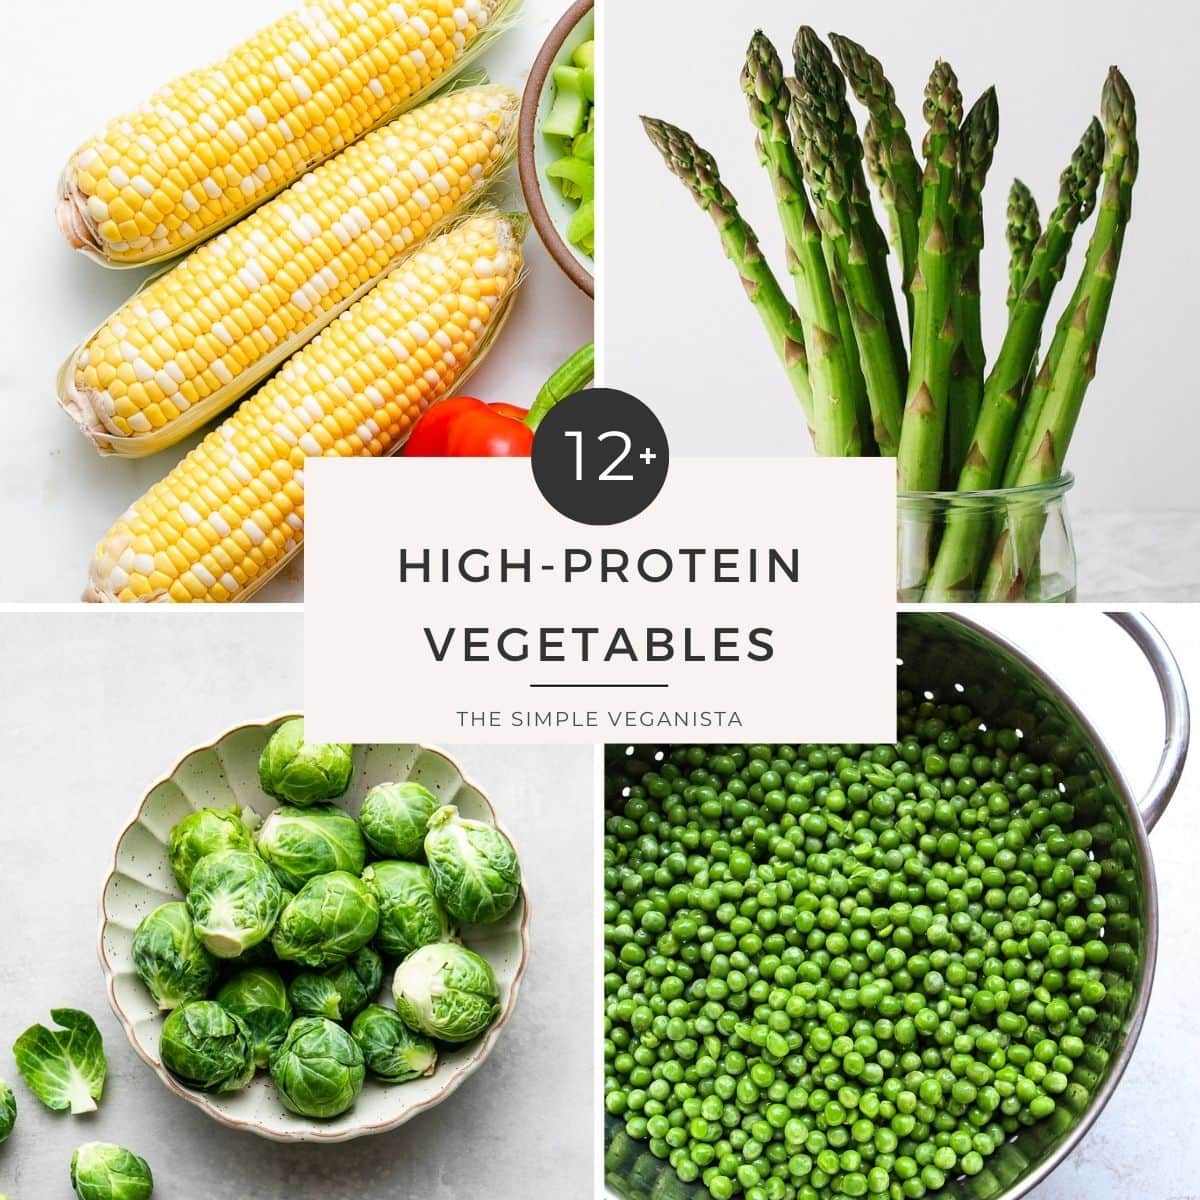 12+ High-Protein Vegetables